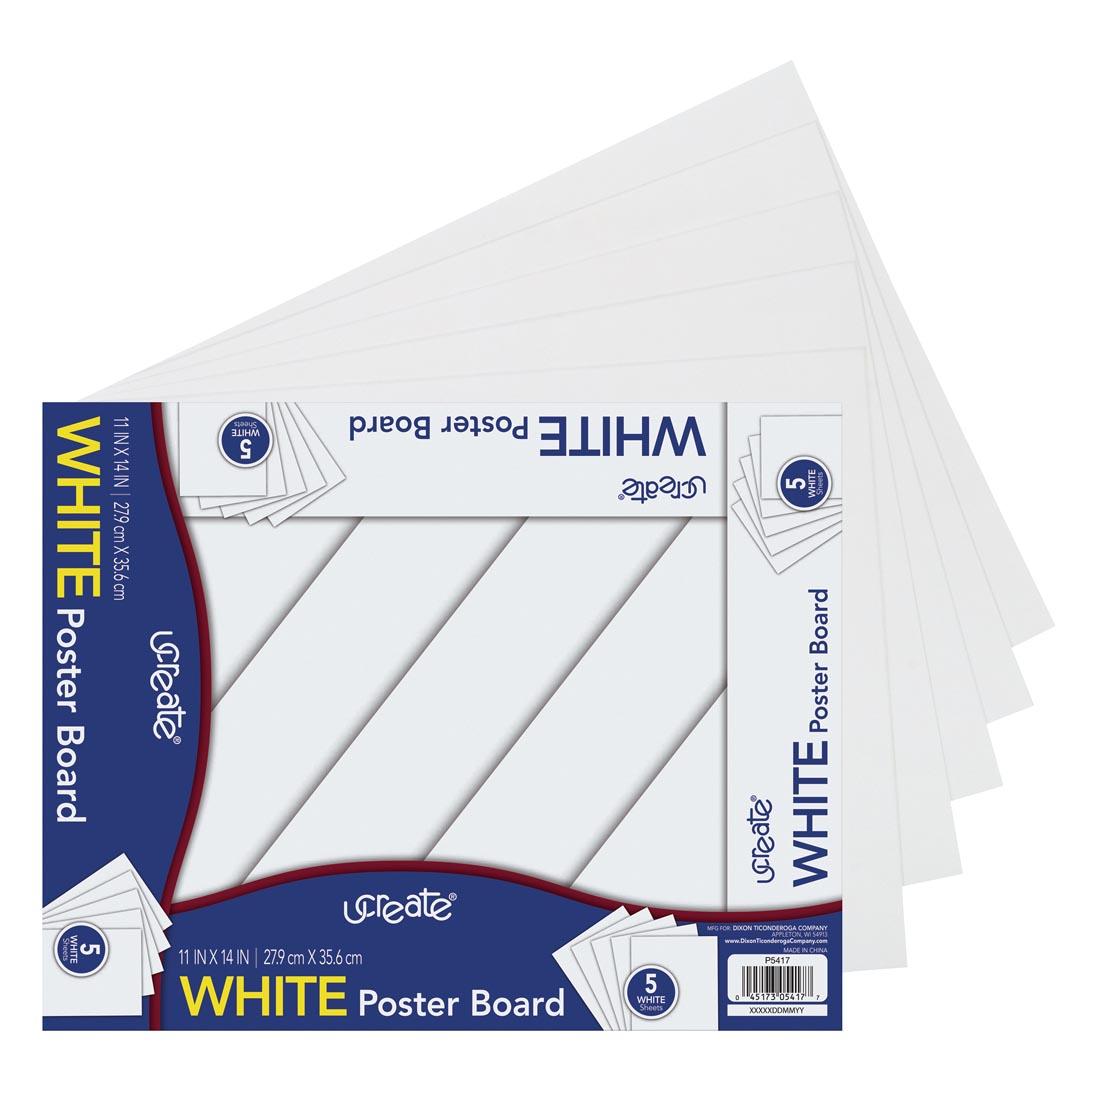 UCreate White Poster Board Convenience Pack